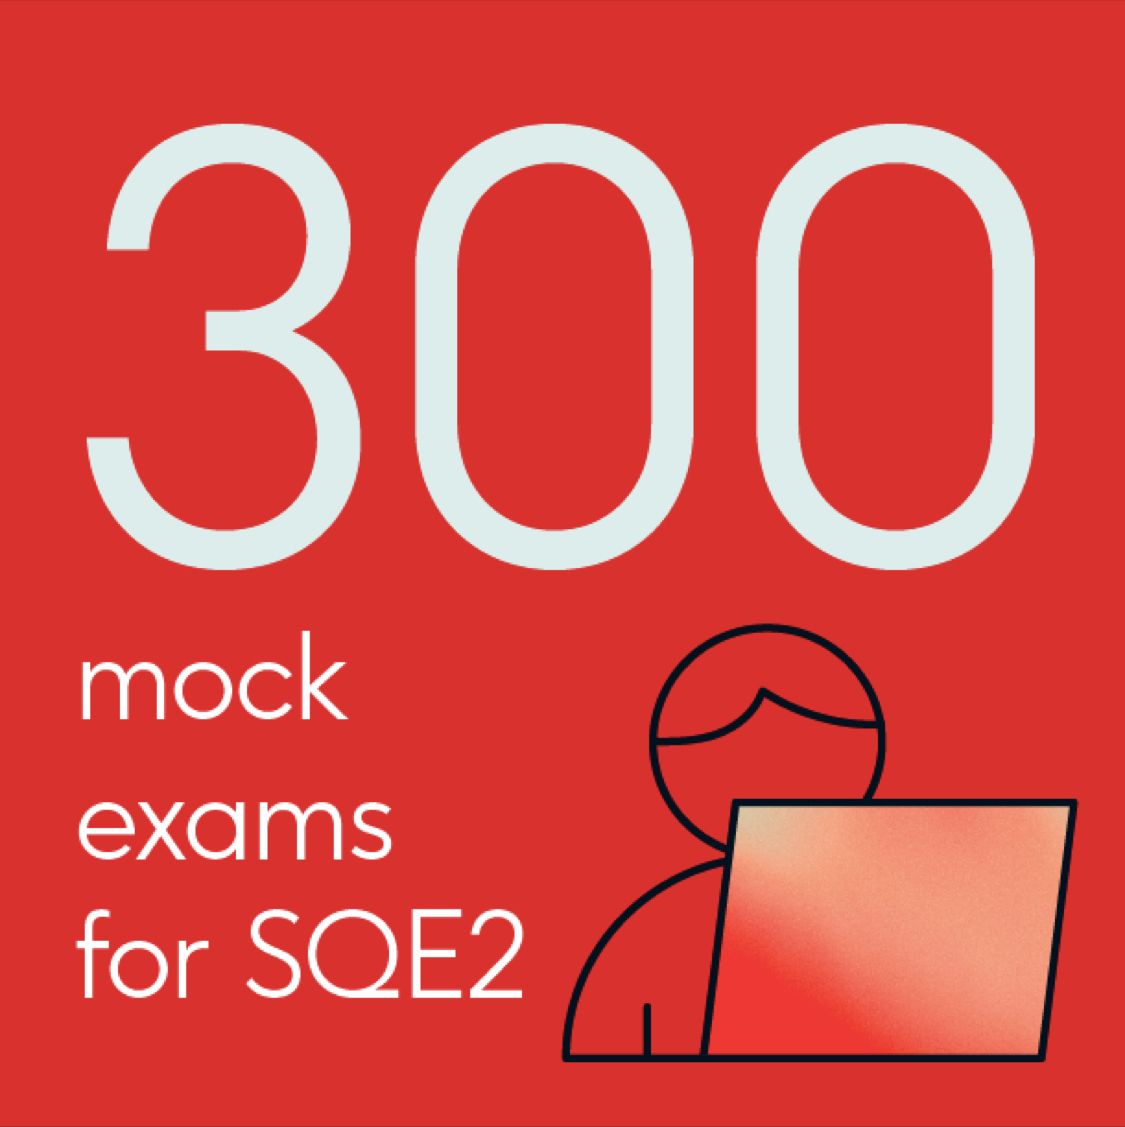 300 mock exams for SQE2